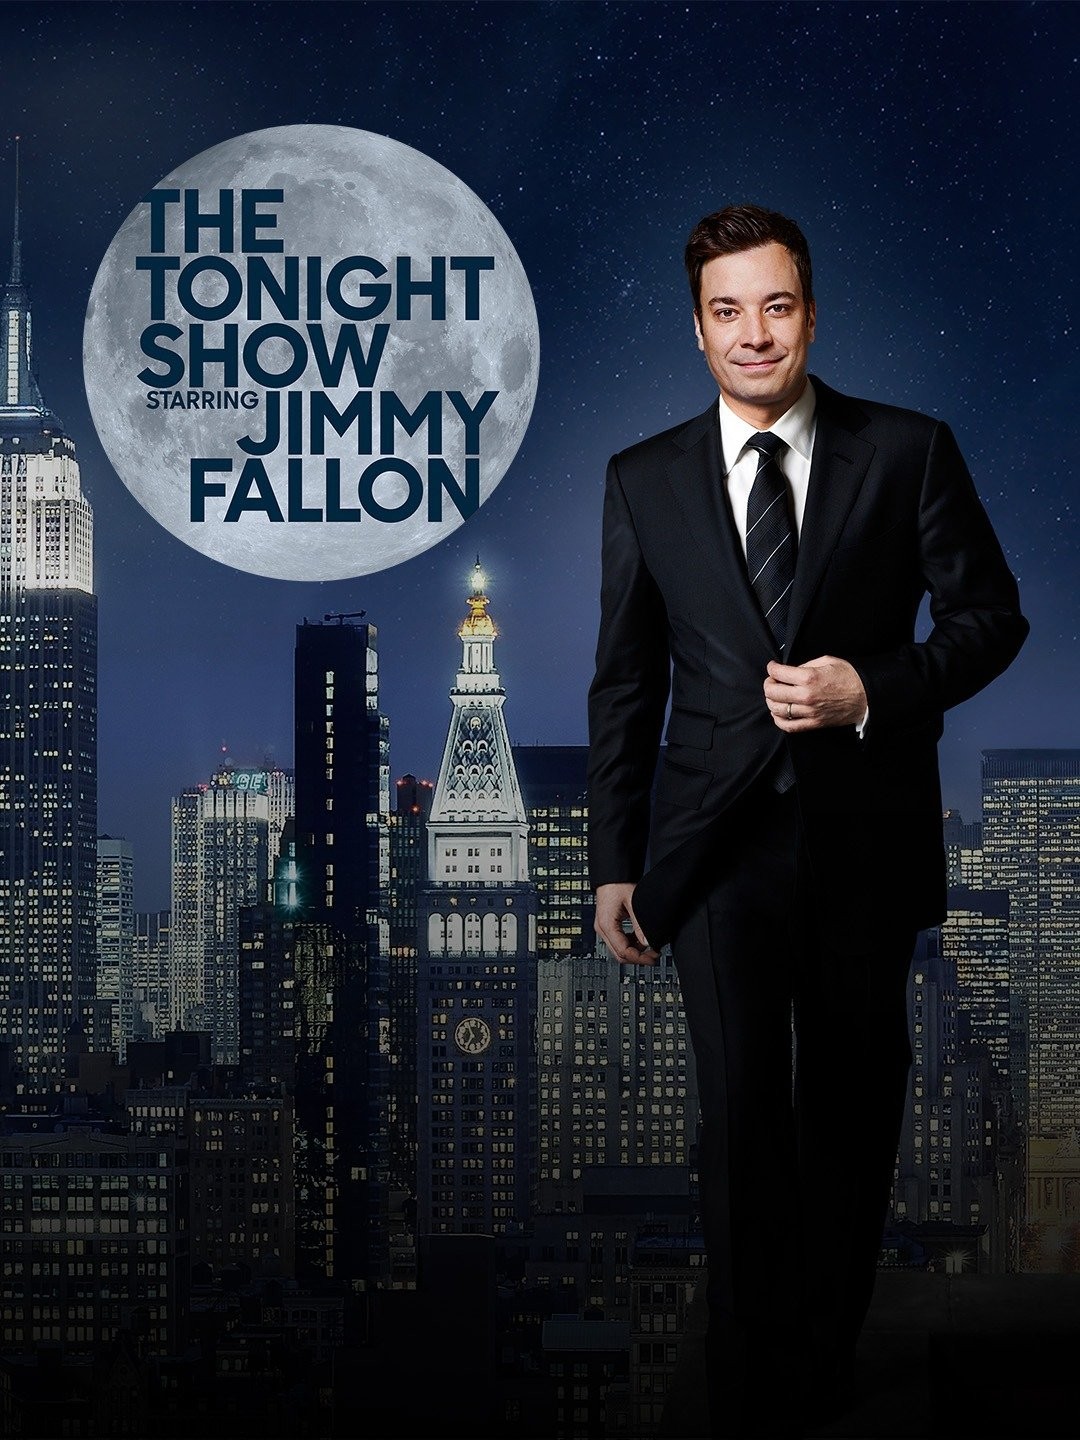 Jimmy Fallon - Wife, Show & Movies